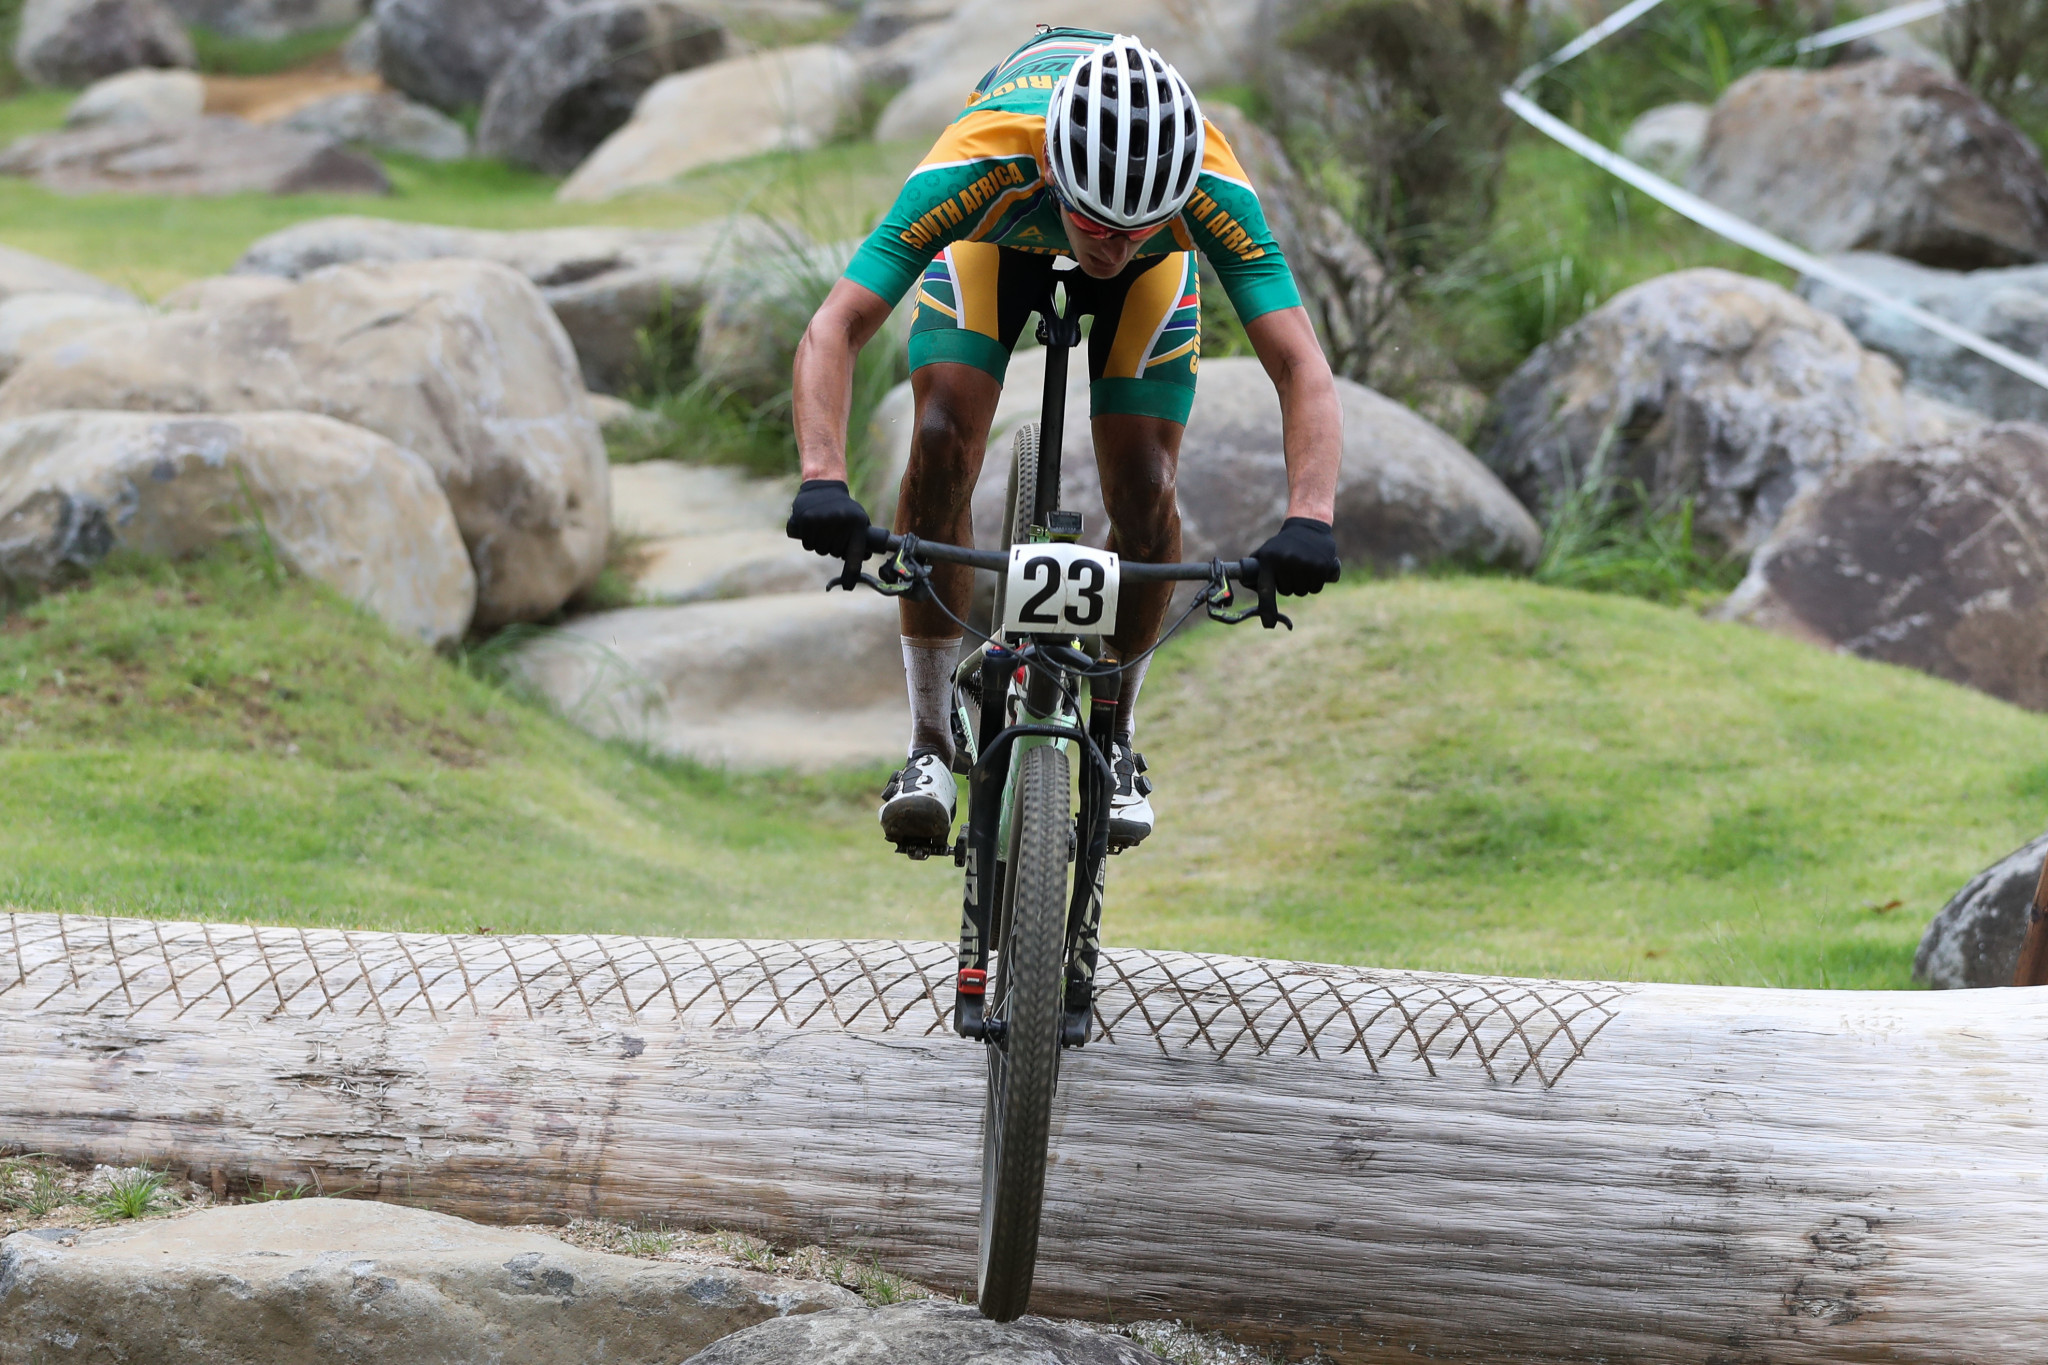 Alan Hatherly of South Africa won the first UCI Mountain Bike World Cup short track race of the season ©Getty Images